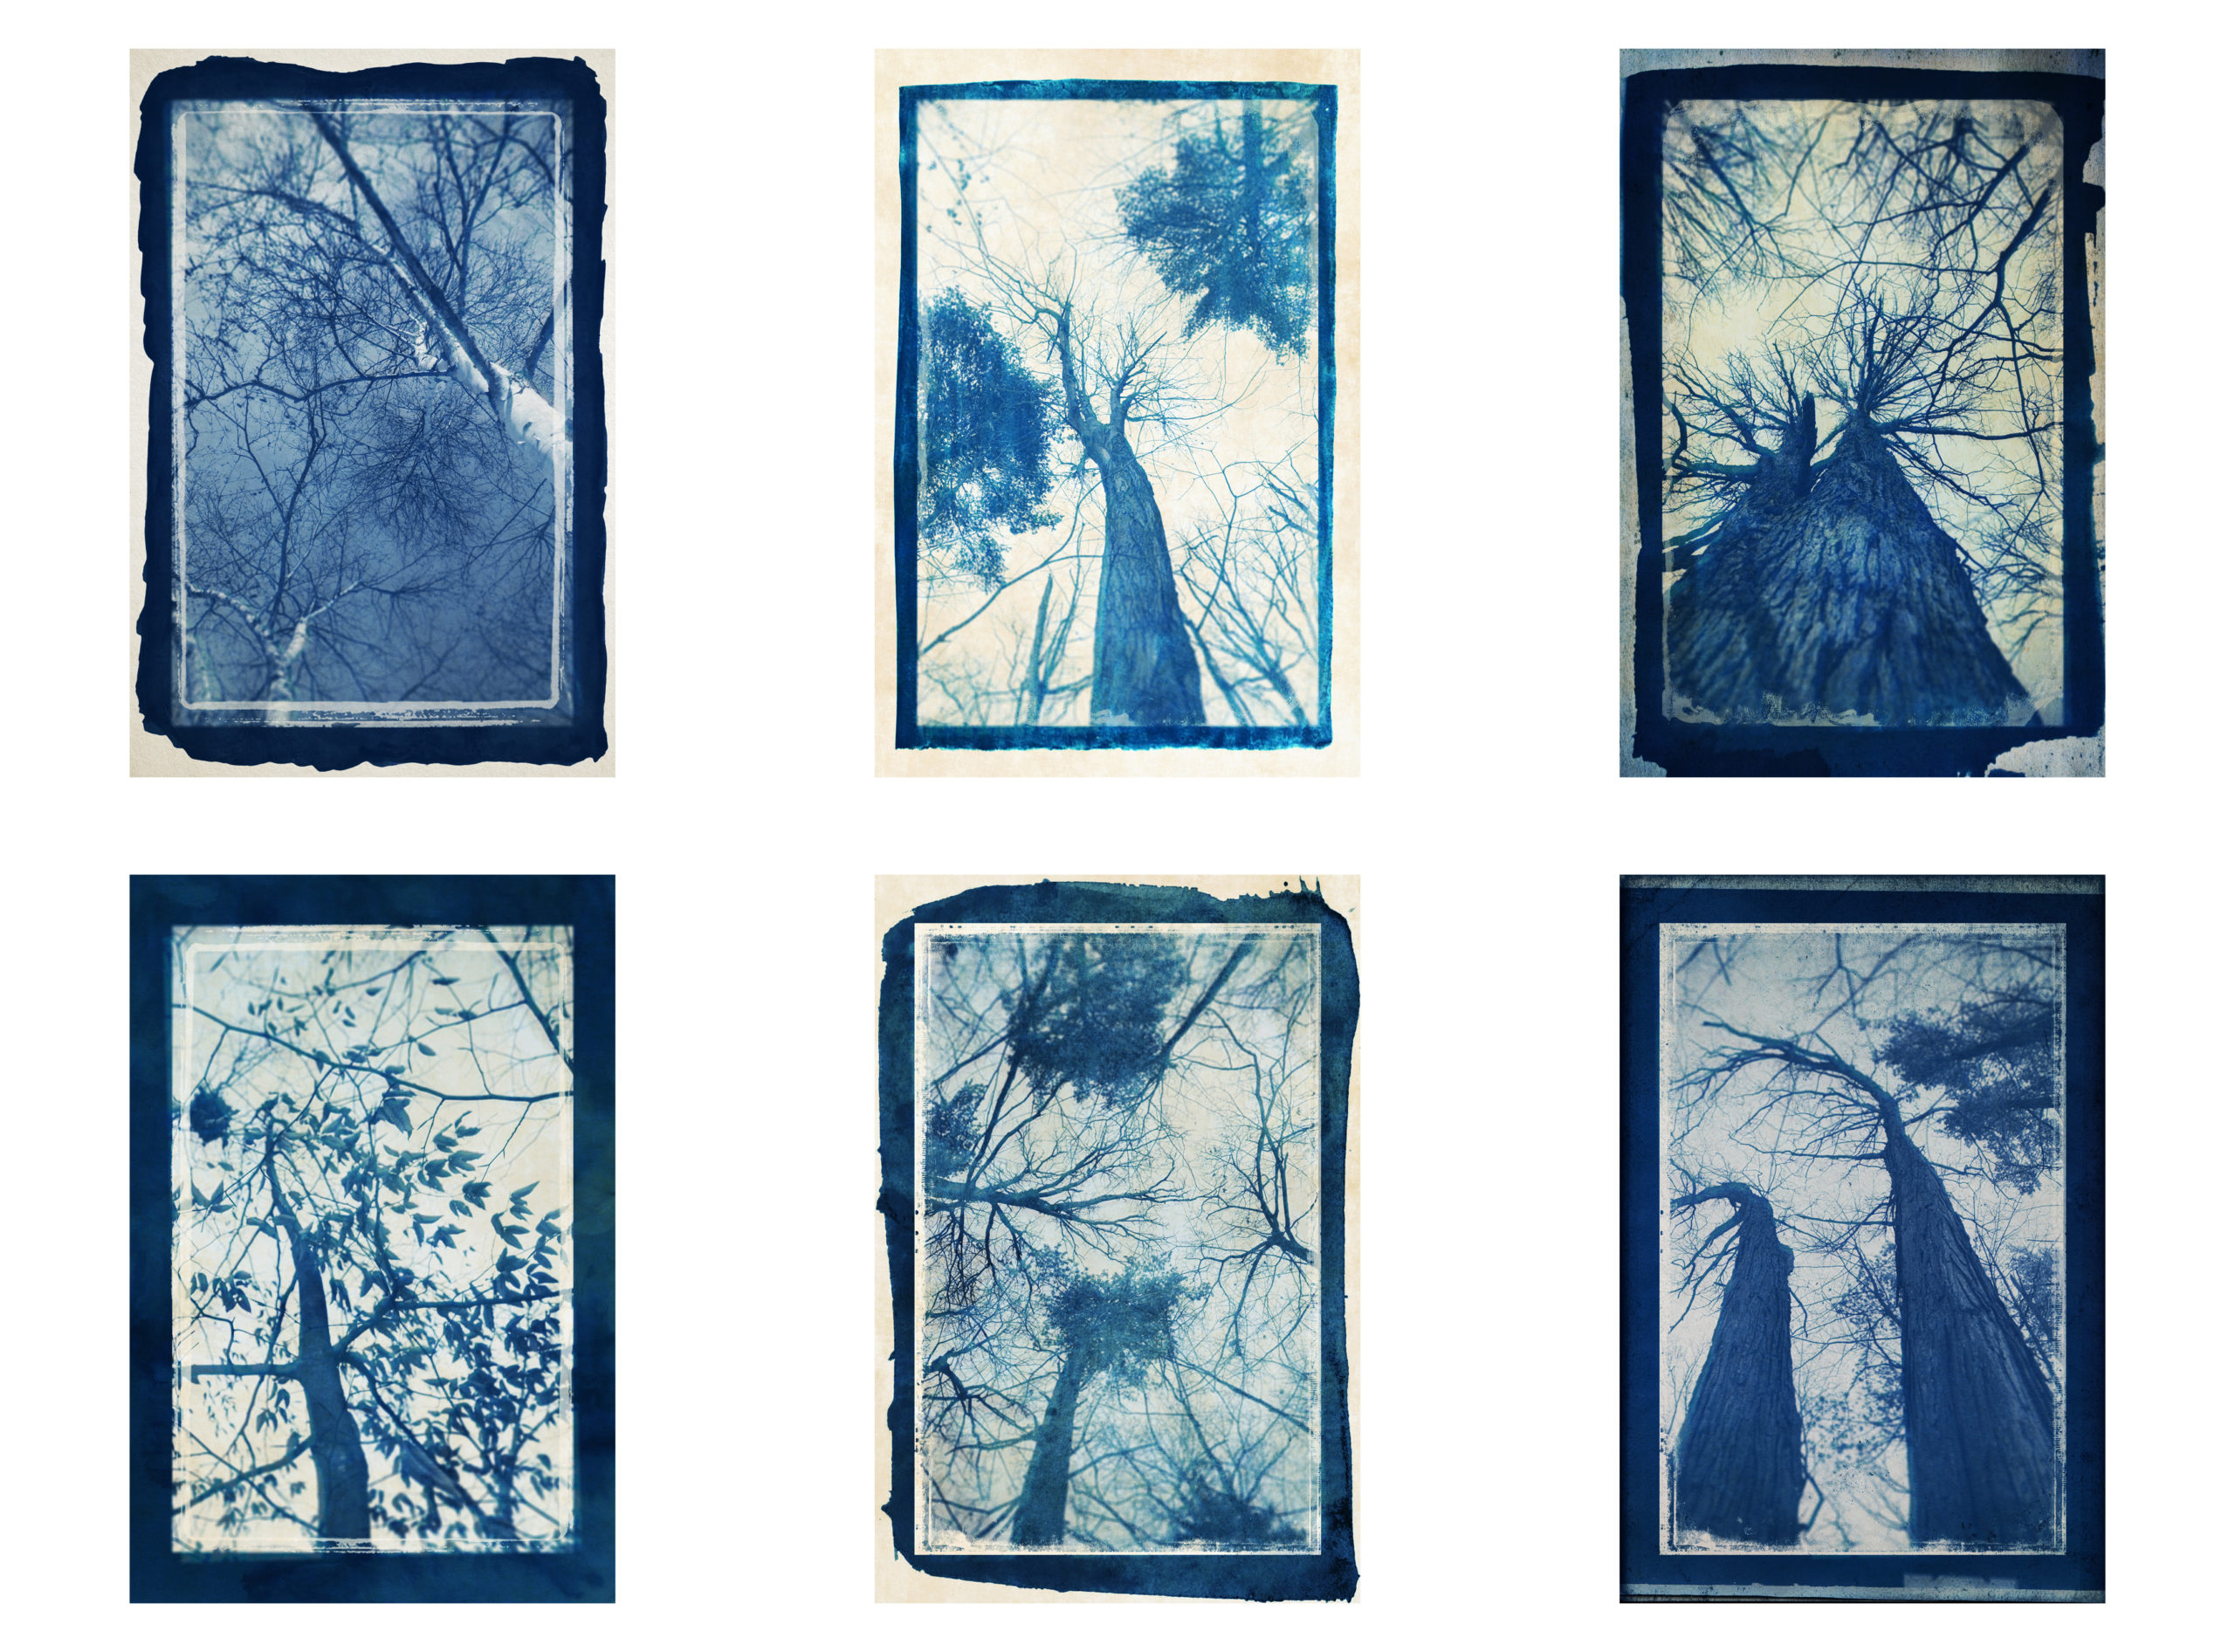 A cyanotype artwork of six different rectangular pieces, each made with different types of tree branches and foliage. The blue artworks are lined in two rows of three.